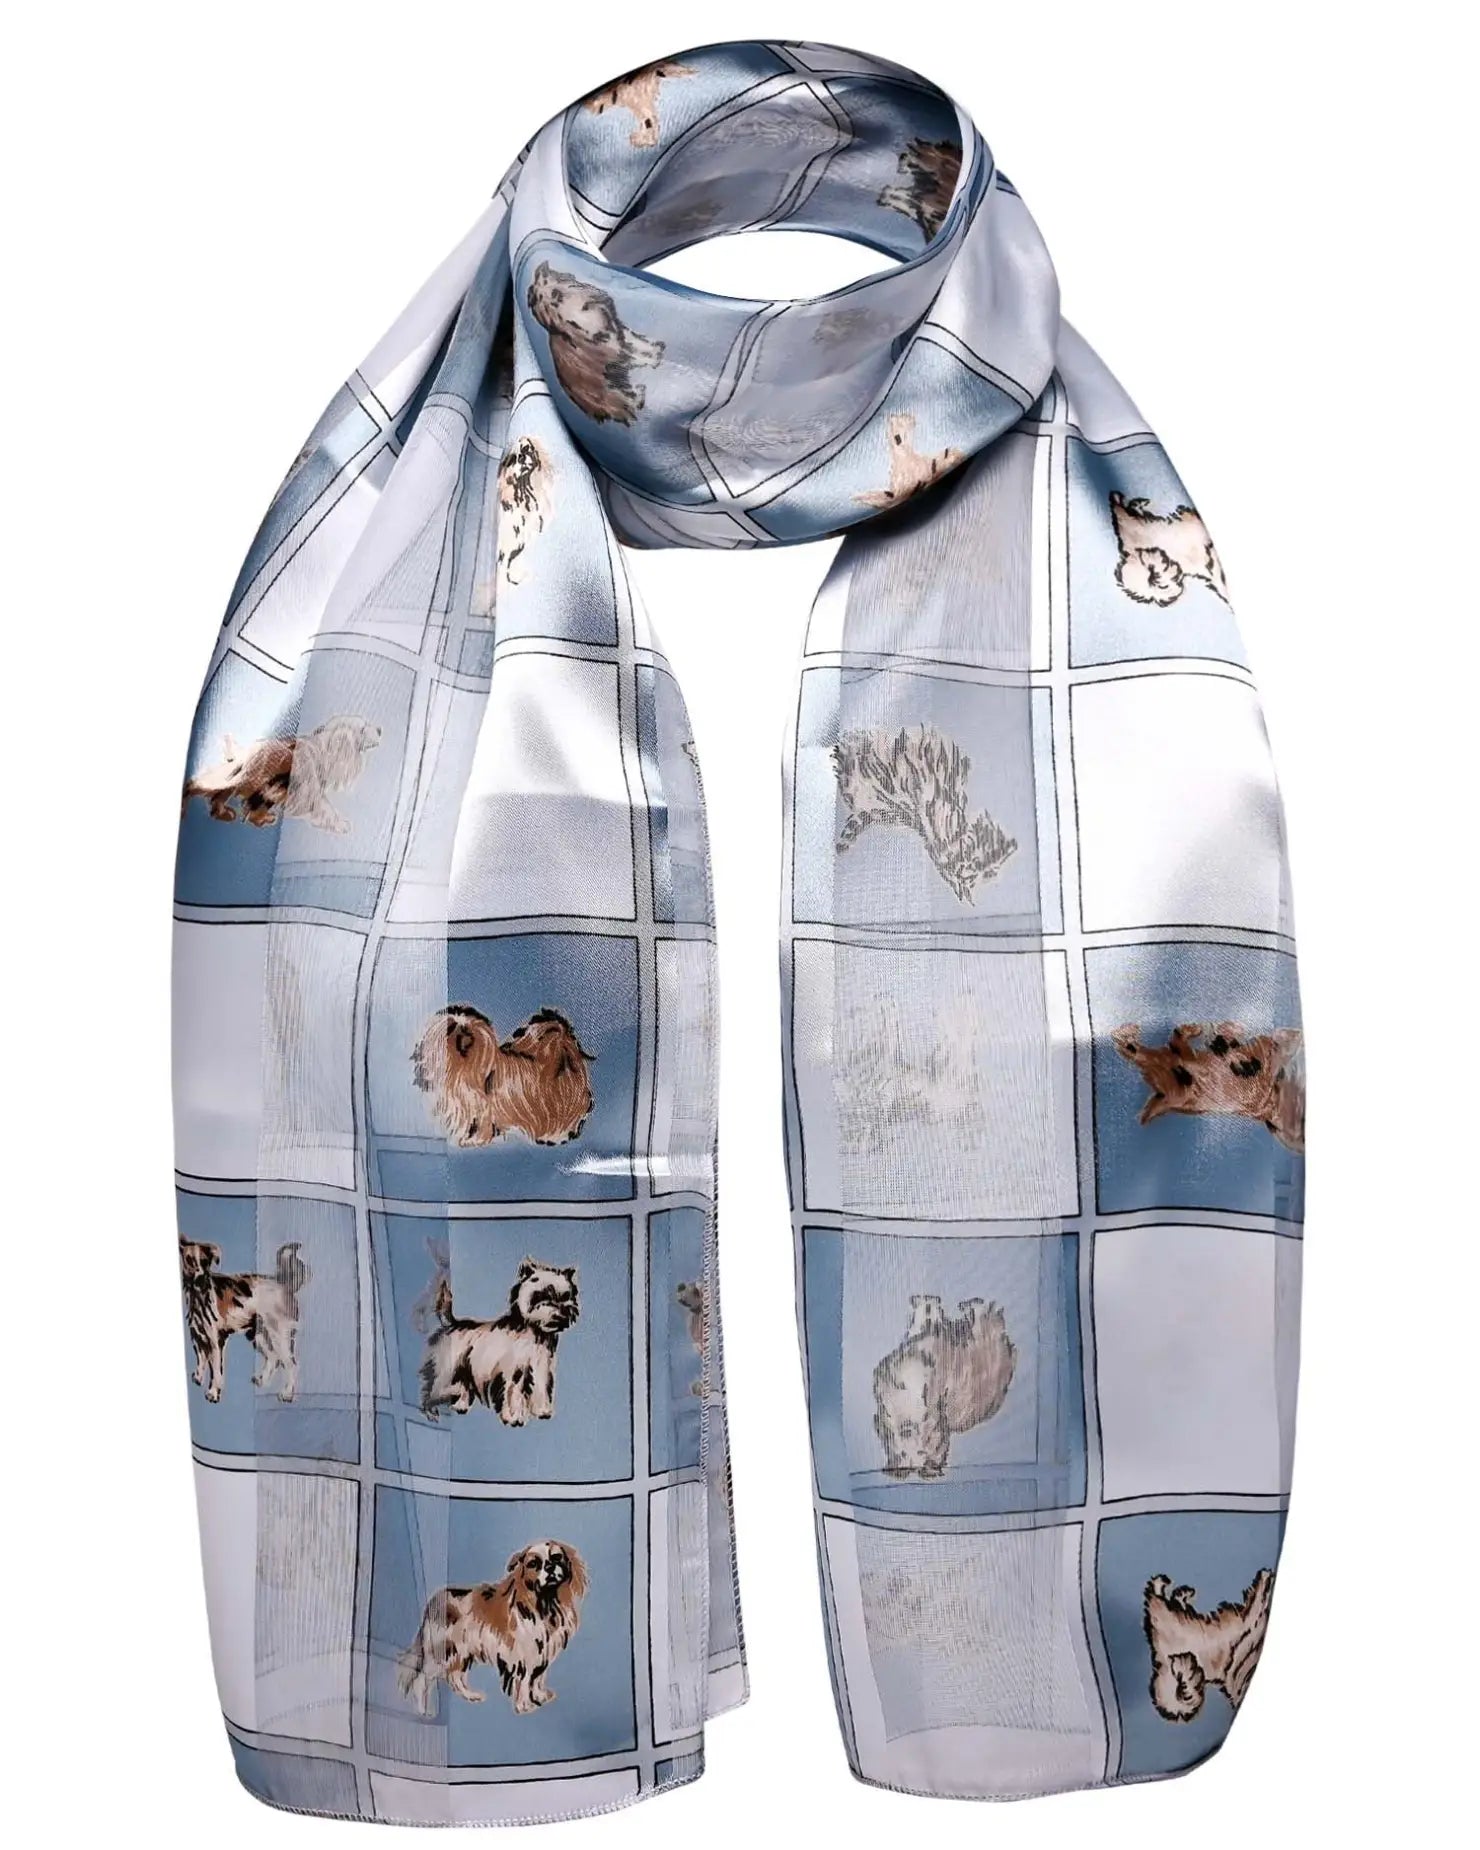 Luxurious Soft Satin Dog Printed Unisex Event Scarf - Fashion snood with adorable dog design